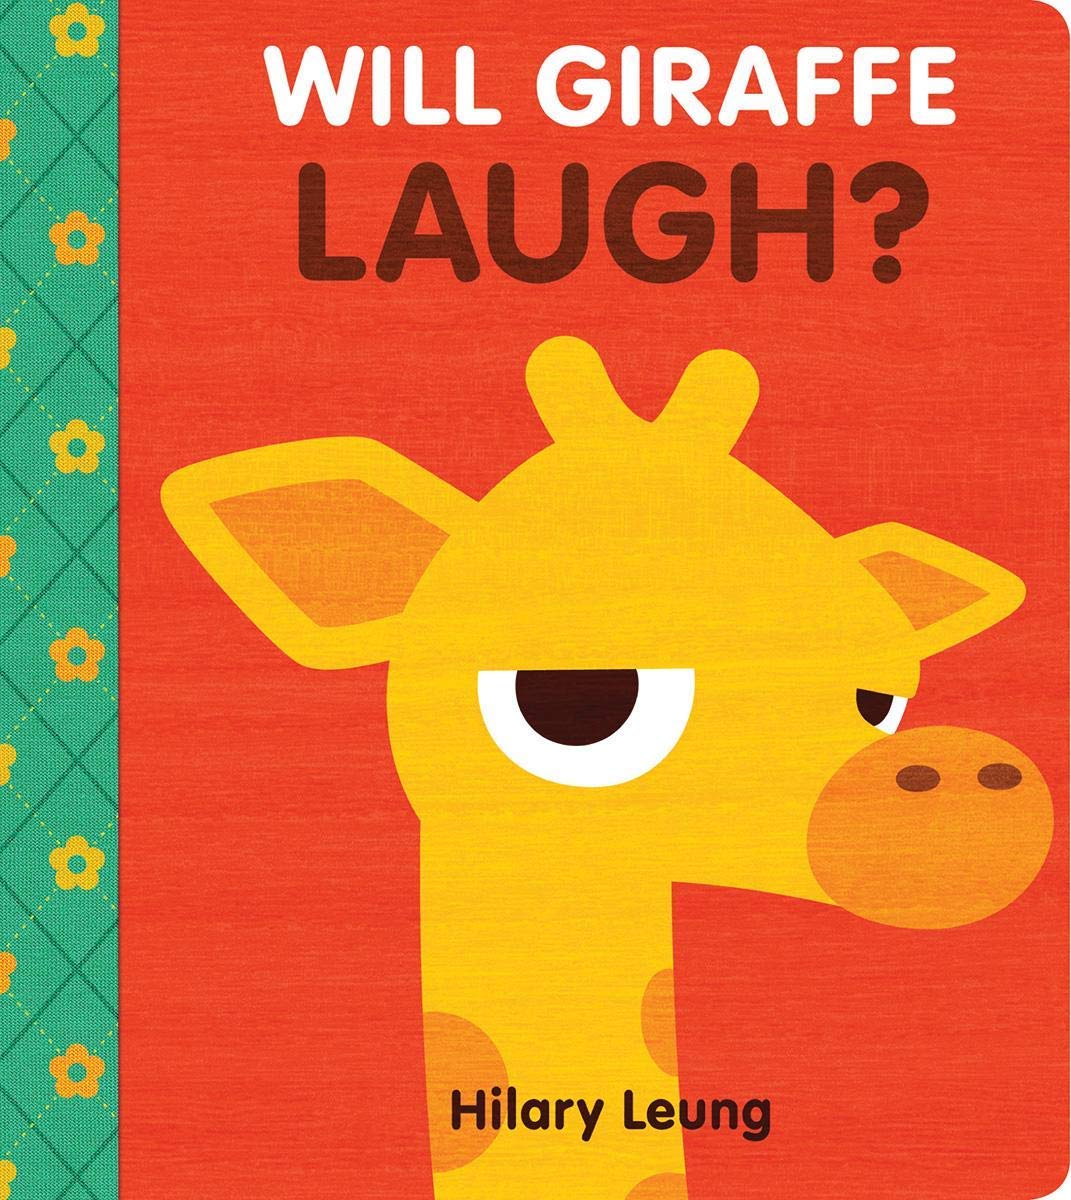 Cover of Will Giraffe Laugh which features a yellow cartoon giraffe looking grumpy on an orange background.  